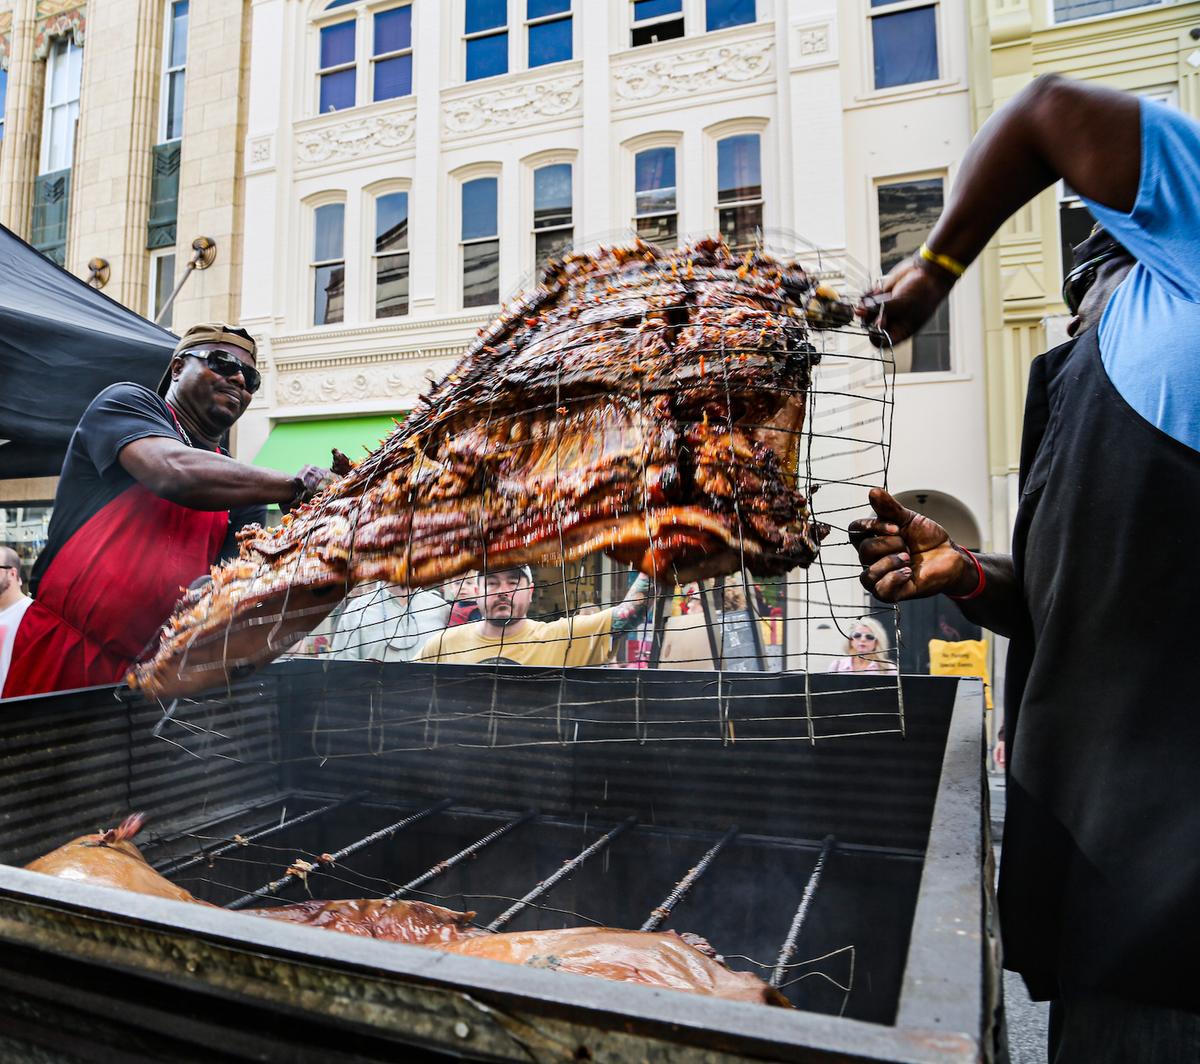 THE FINAL HOUR: Flipping the hog, one of the last steps in cooking it, requires coordination and trust. (Angie Mosier)